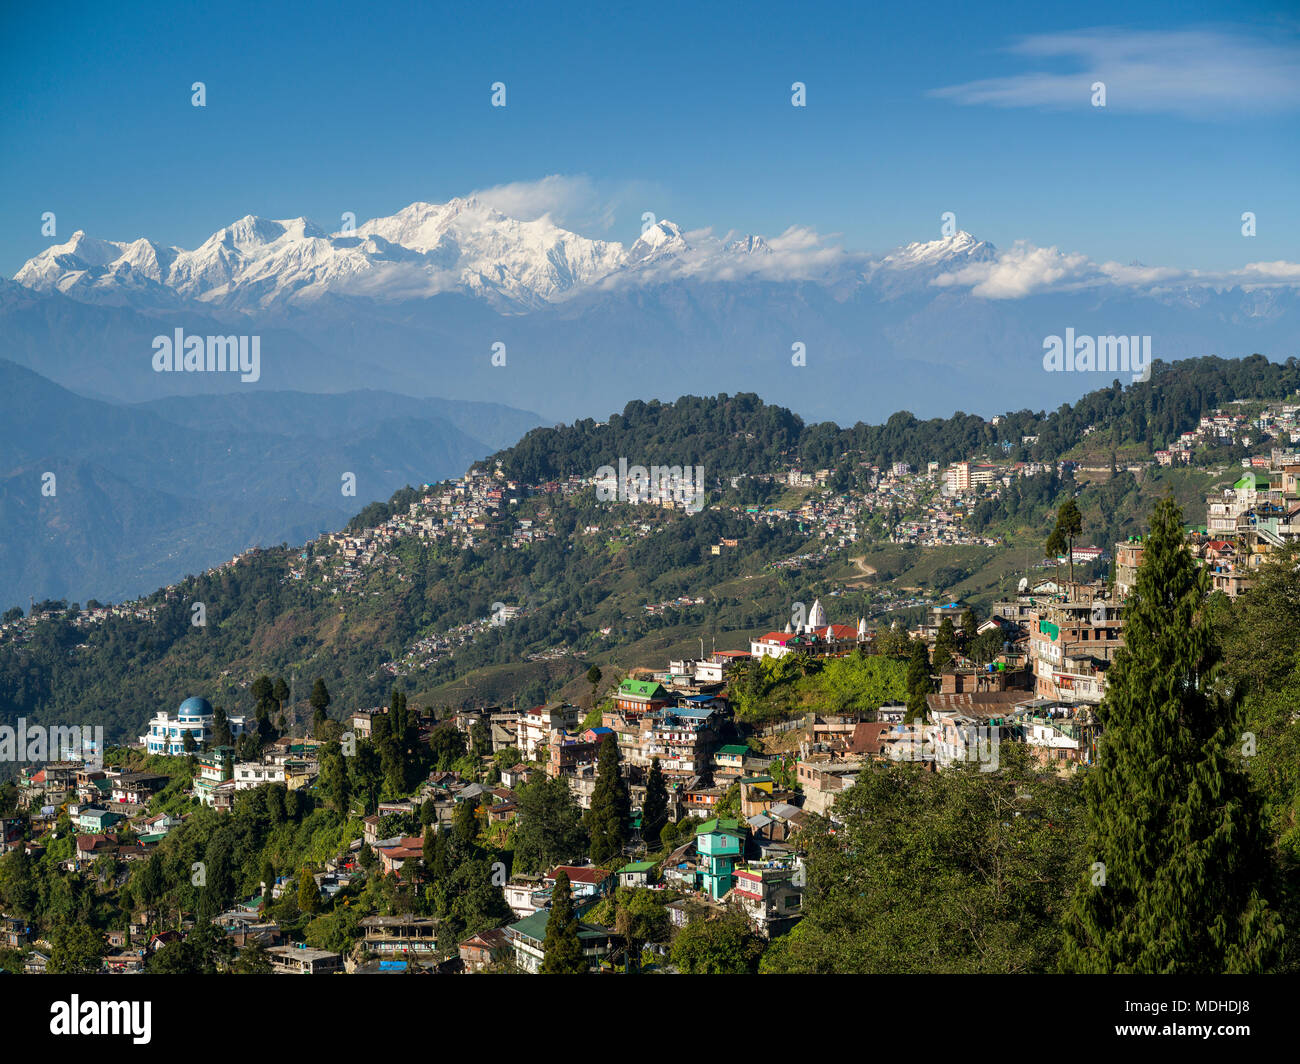 Town on a mountainside with the rugged, snow-capped peaks of the Himalayas in the distance; Darjeeling, West Bengal, India Stock Photo